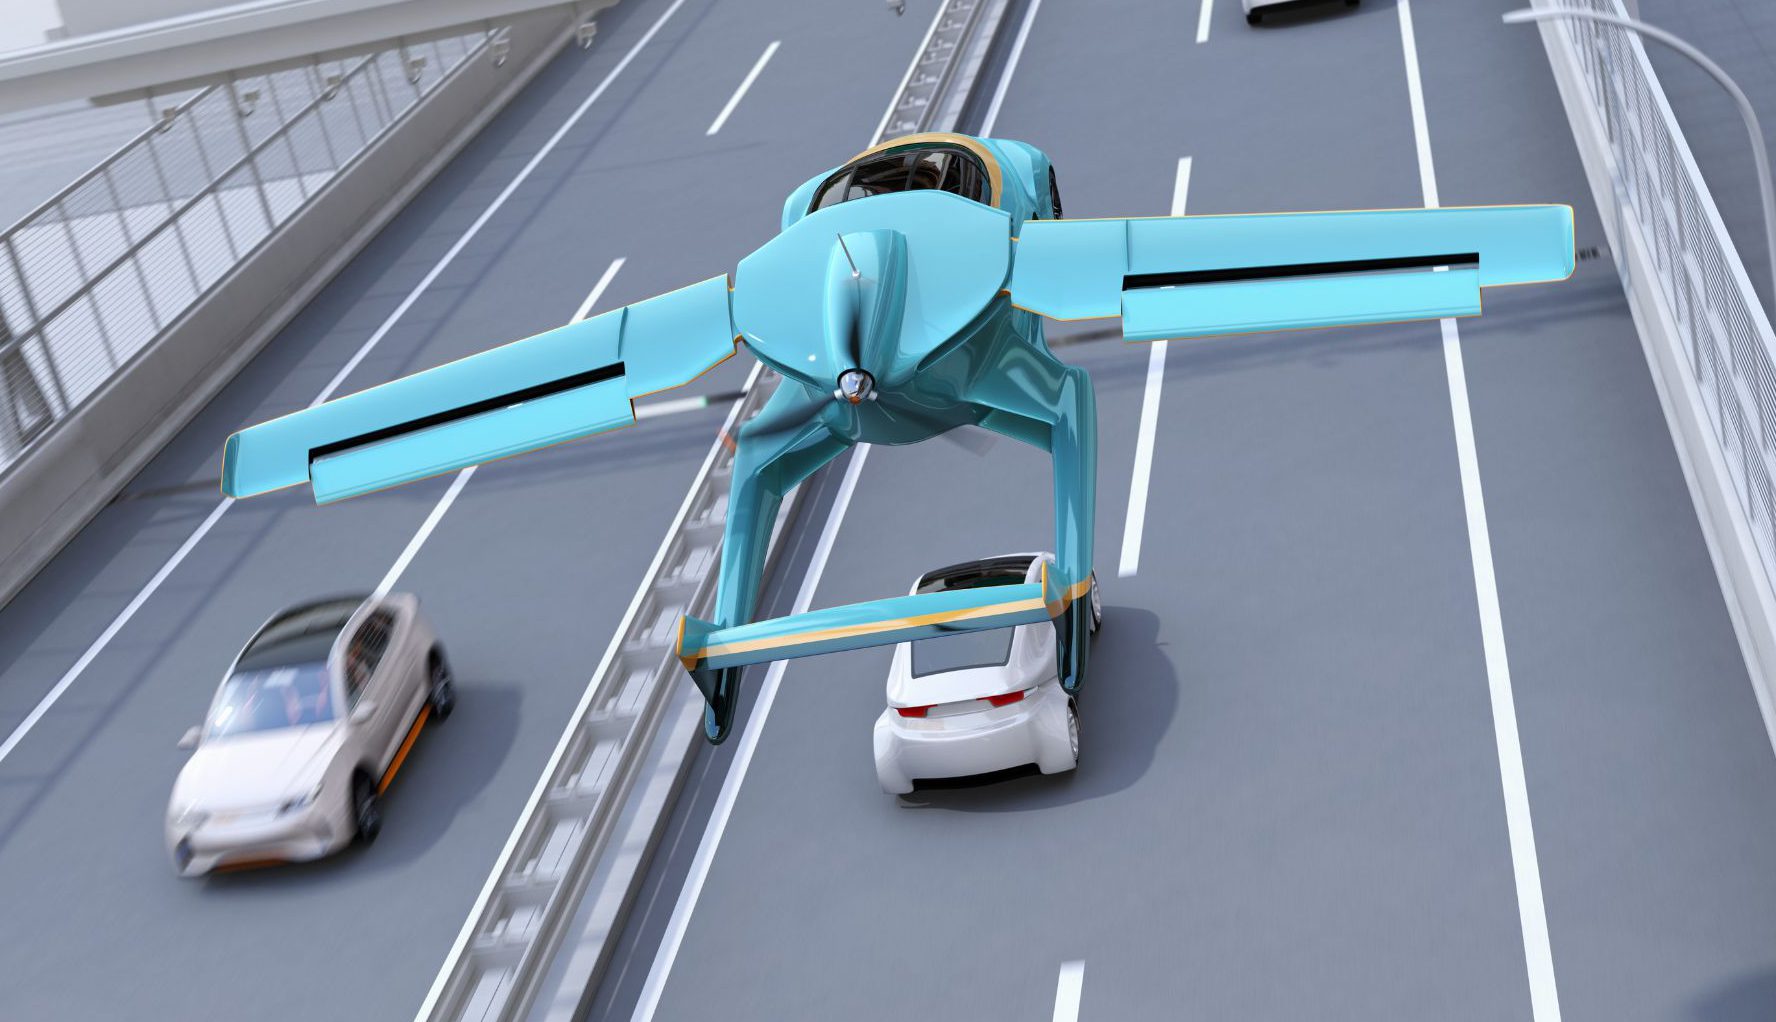 Global Flying Cars Market Growth Analysis And Indications – Includes Flying Cars Market Overview